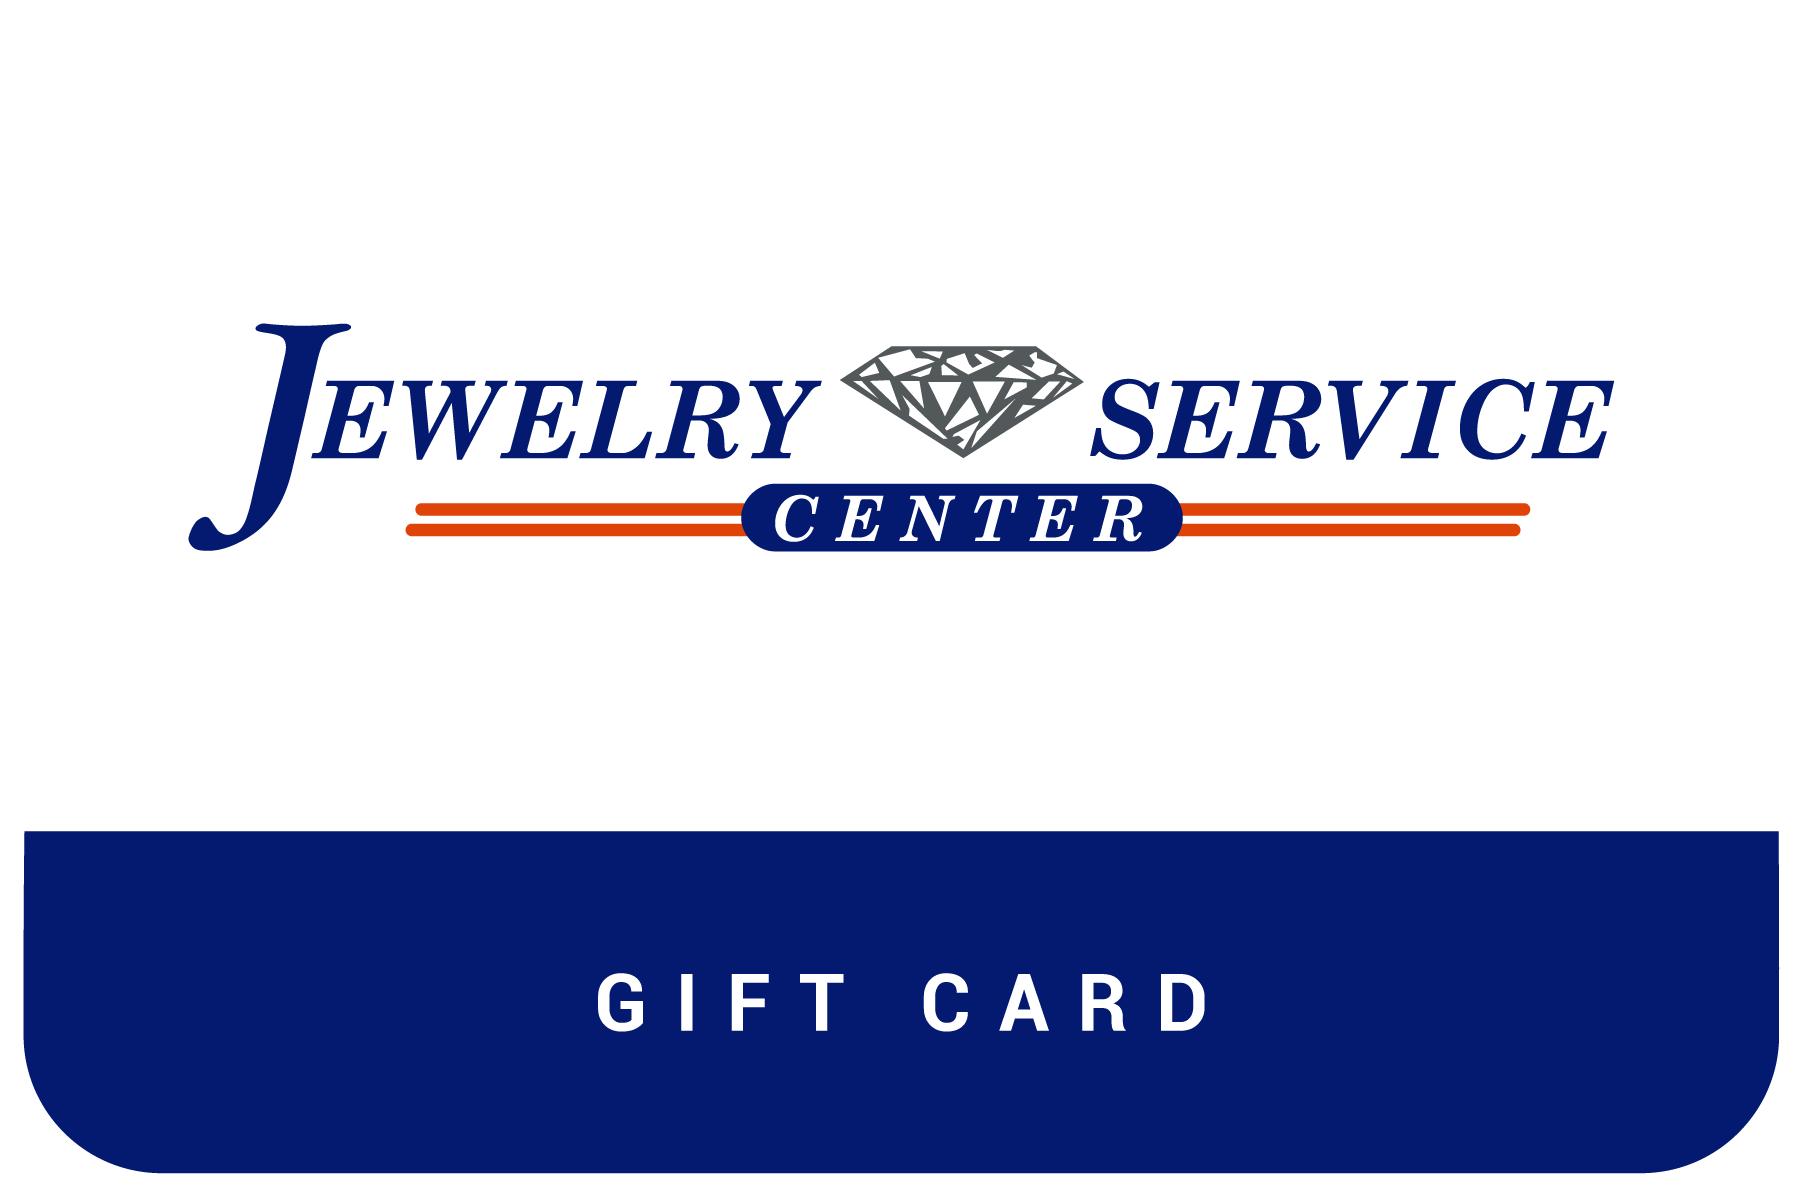 Jewelry Service Center $75 Gift Card